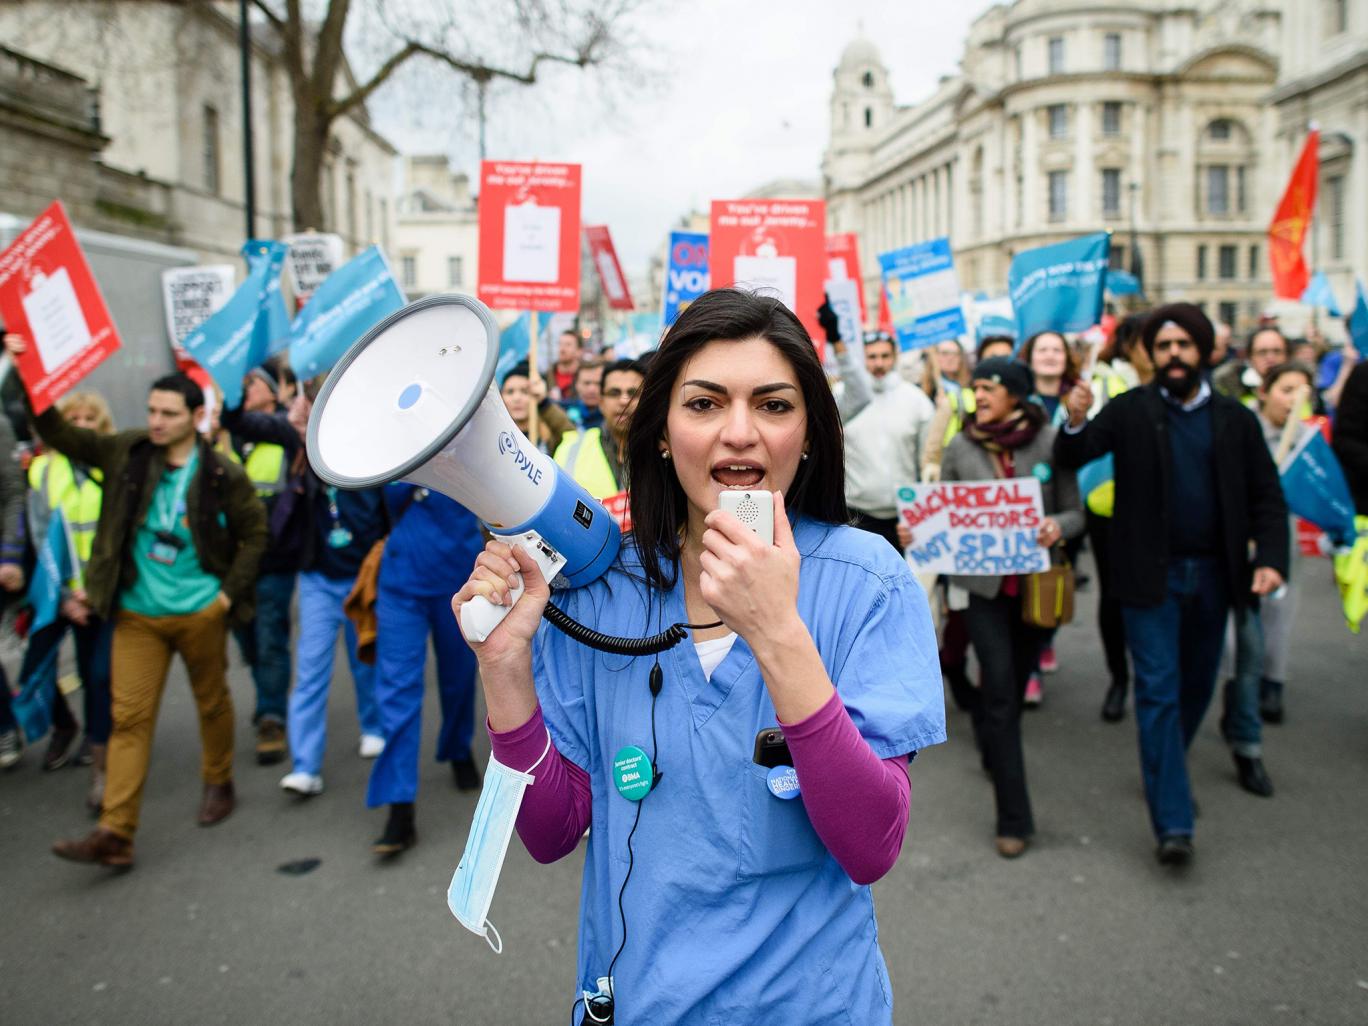 Emergency Live | #JuniorDoctorsStrike - You will miss your NHS when it is gone. Support it now.